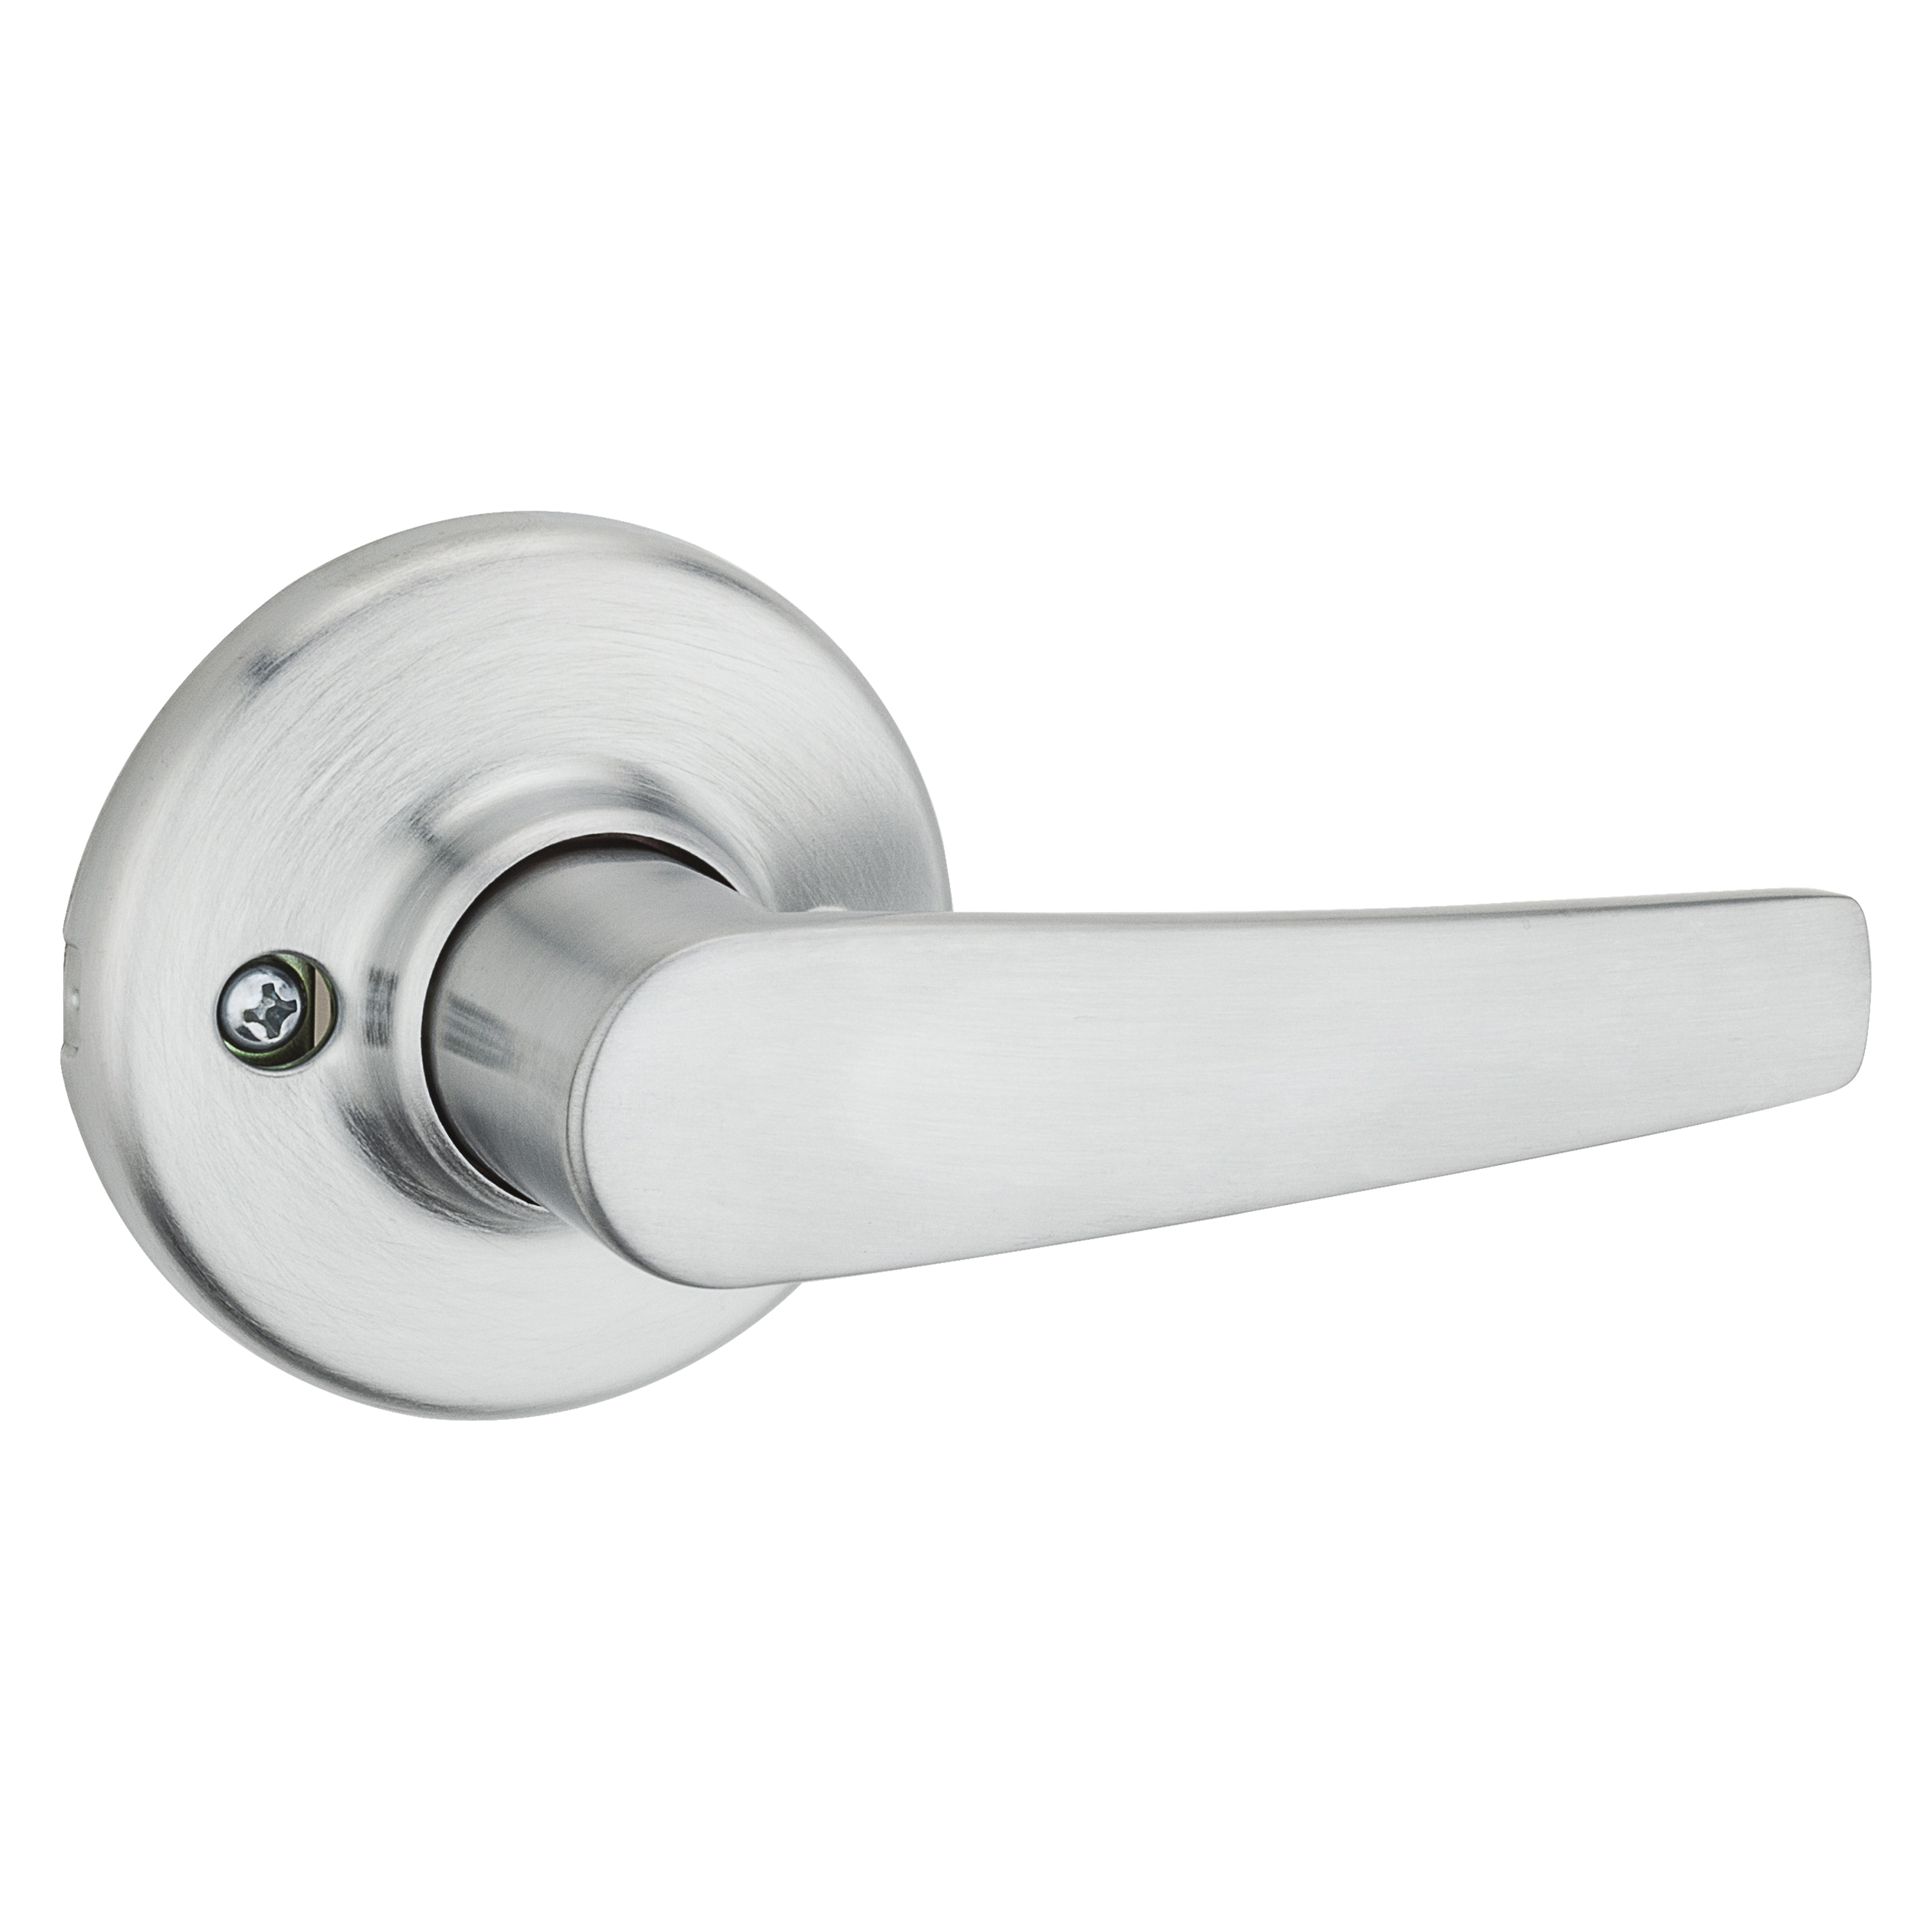 488DL 26D Half Inactive Dummy Lever, Satin Chrome, Zinc, Residential, Reversible Hand, 3 Grade